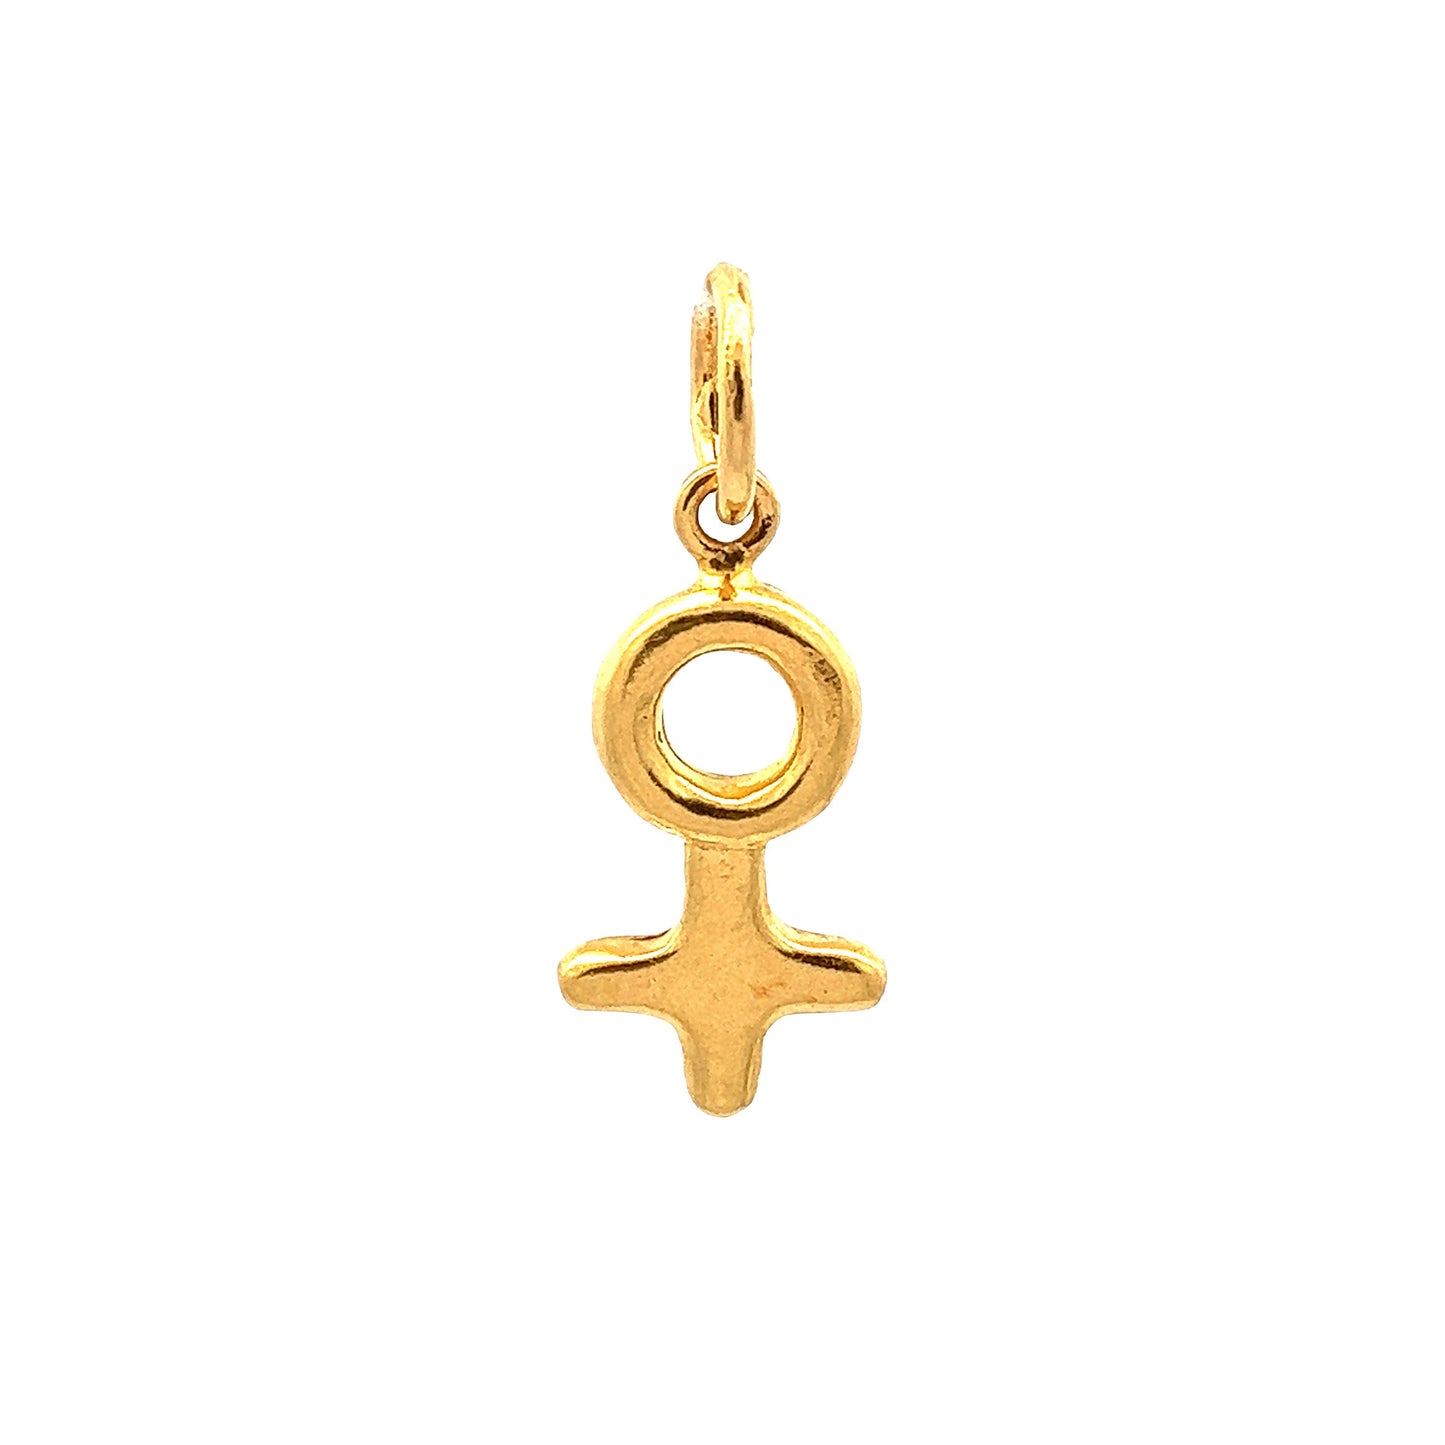 Load image into Gallery viewer, GOLD PENDANT ( 22K ) ( 1.75g ) - 0012267 Chain sold separately
